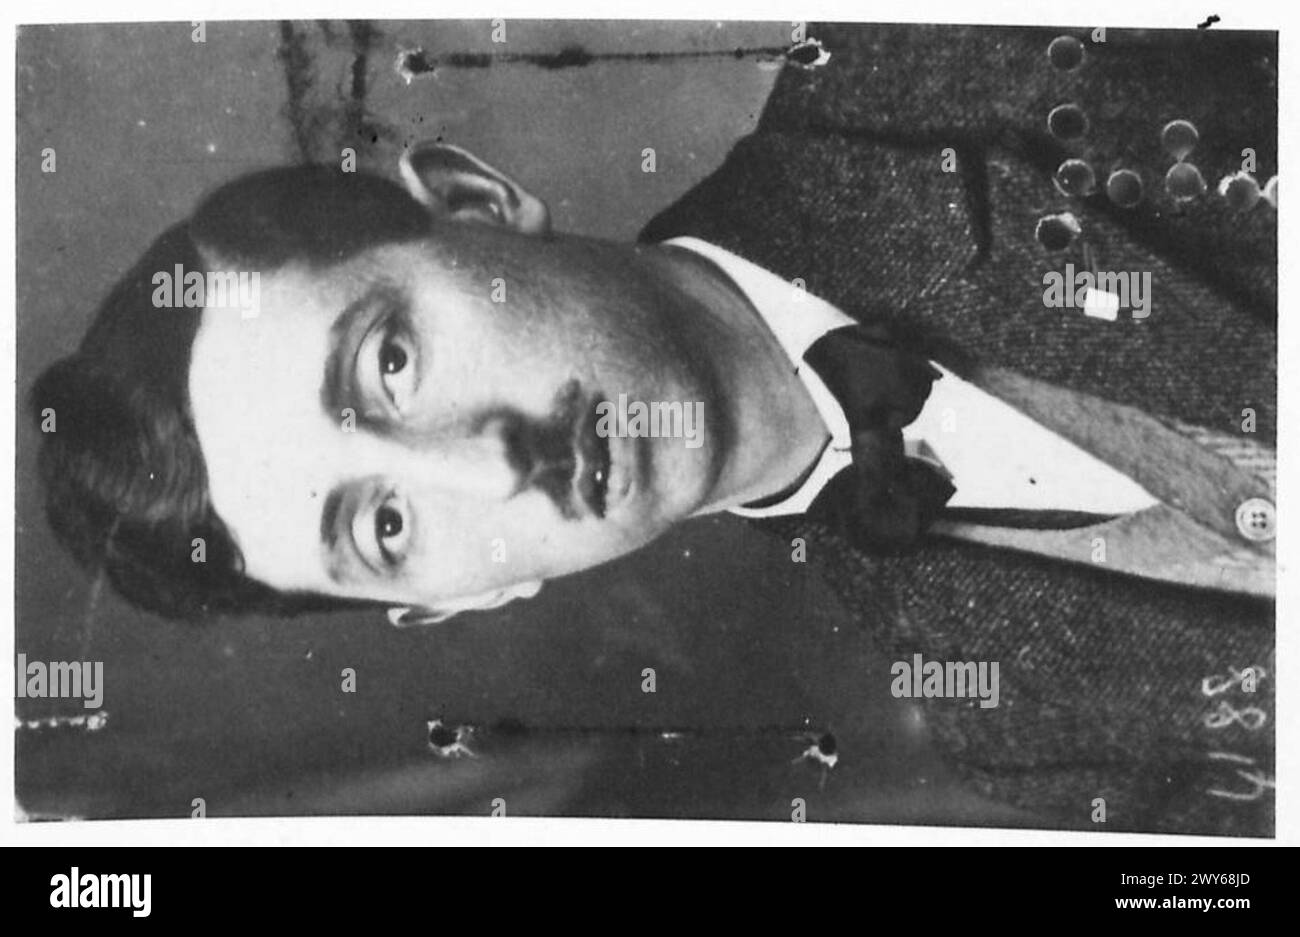 PICTURES OF GESTAPO VICTIMS SHOWING THE EFFECT OF THE TREATMENT METED OUT DURING THEIR IMPRISONMENT. - F. Van Hoecke, aged 52, imprisoned in Breedonck, accused of espionage. Picture shows him before his imprisonment, and… , British Army, 21st Army Group Stock Photo